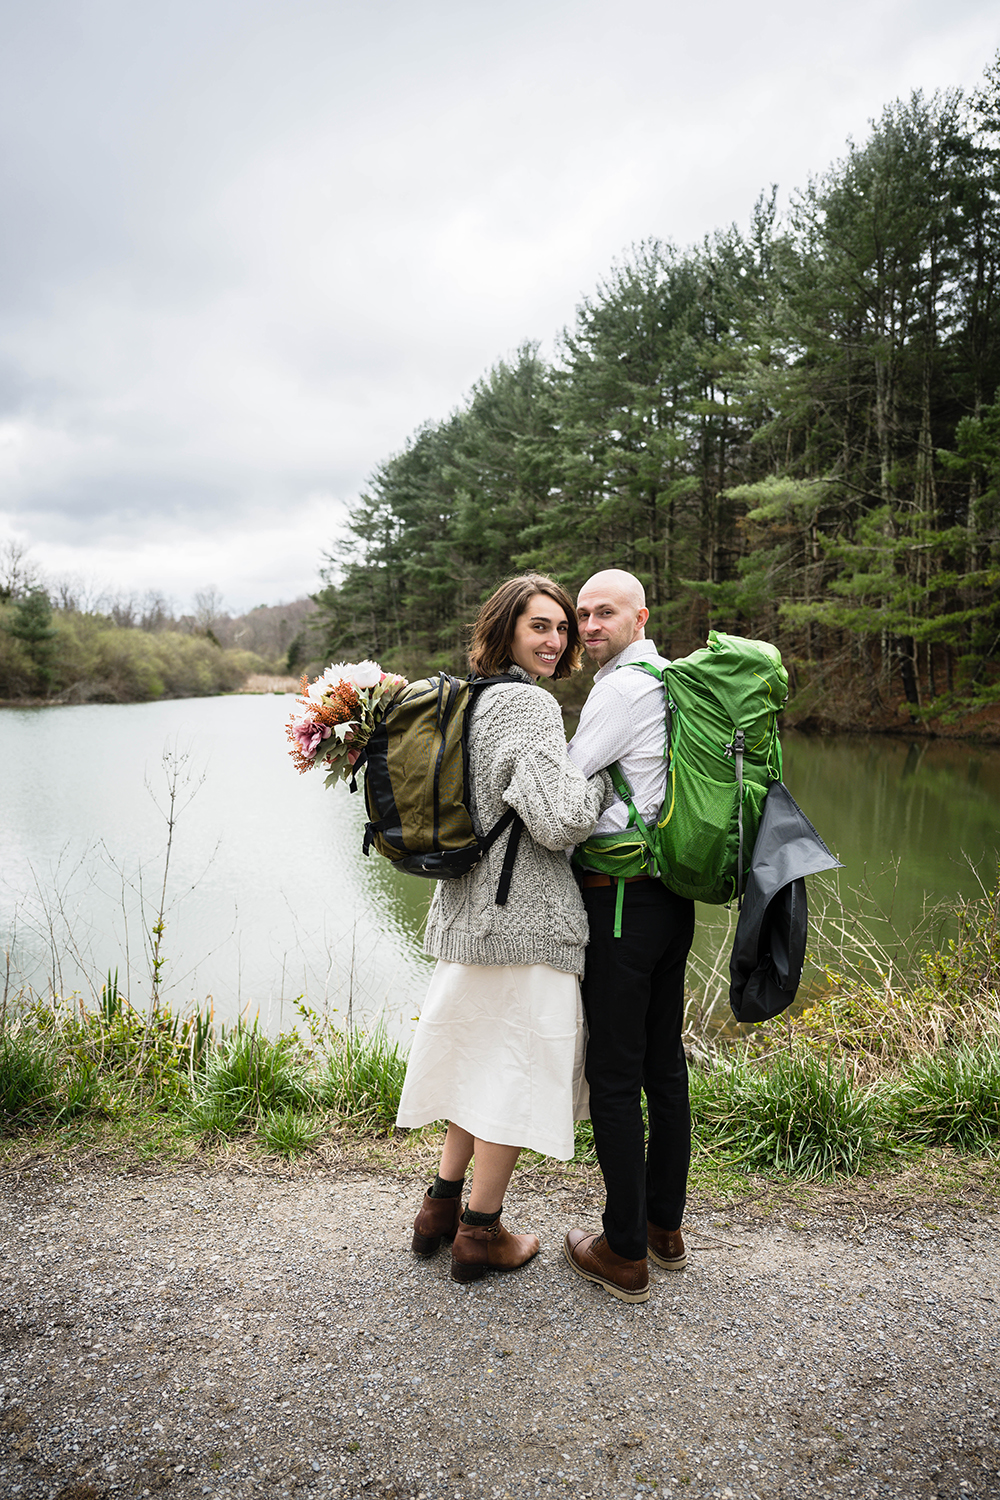 A wedding couple huddles together with their hiking gear and grabs onto one another as they look back and smile for a photo.